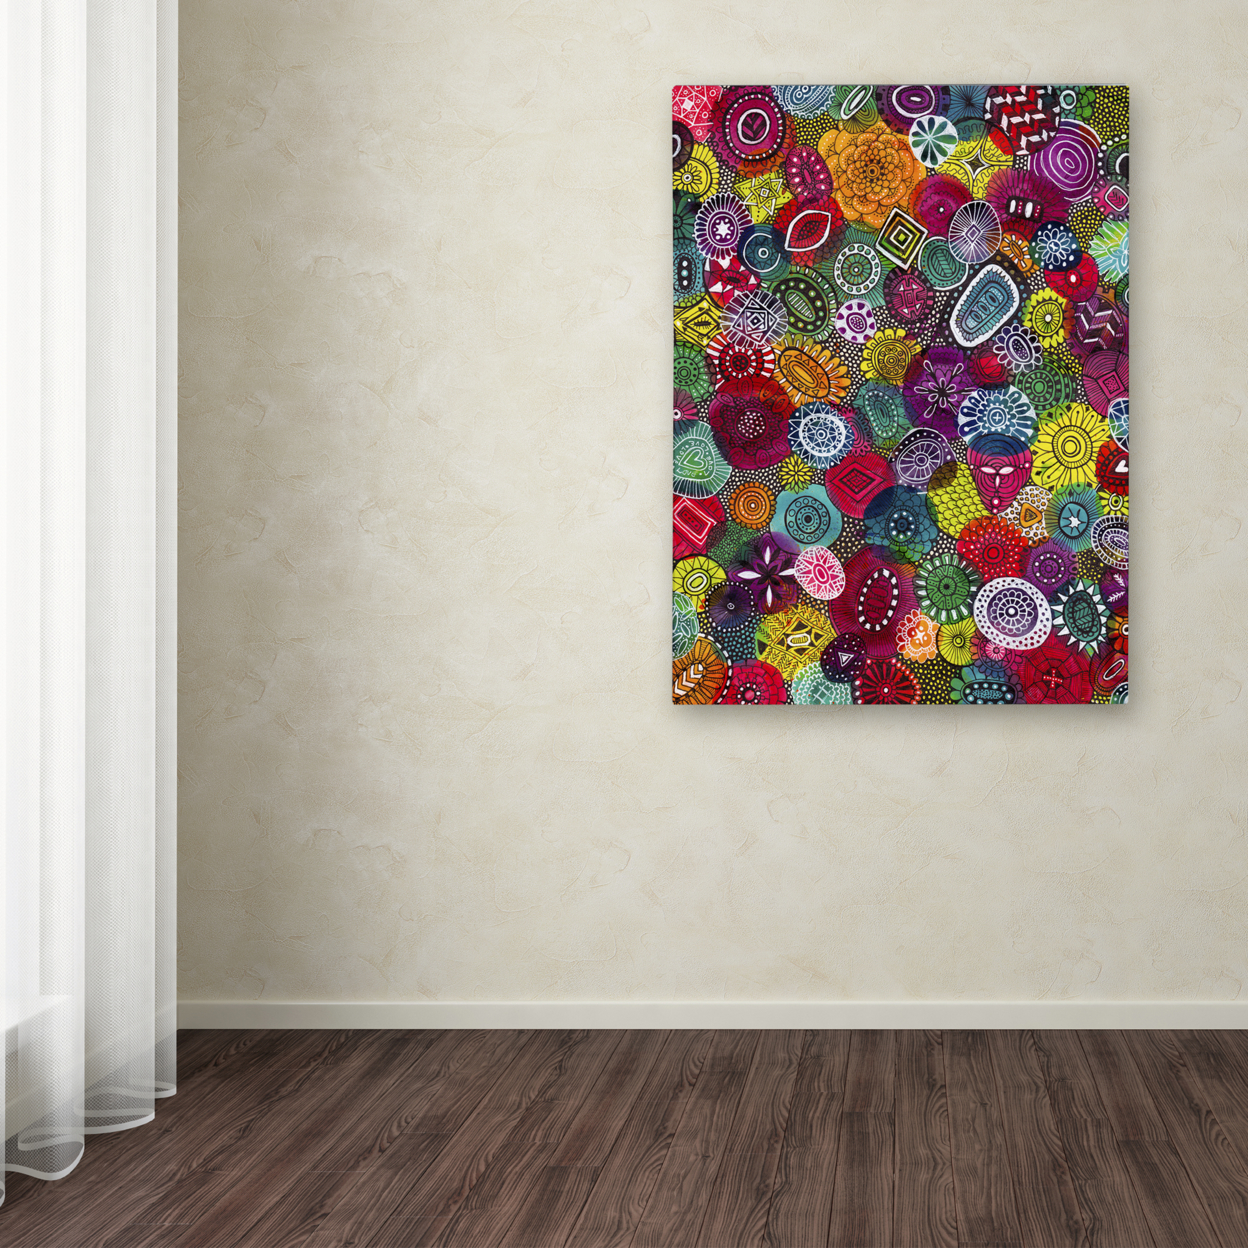 Hello Angel 'Autumn Jewels' Canvas Wall Art 35 X 47 Inches